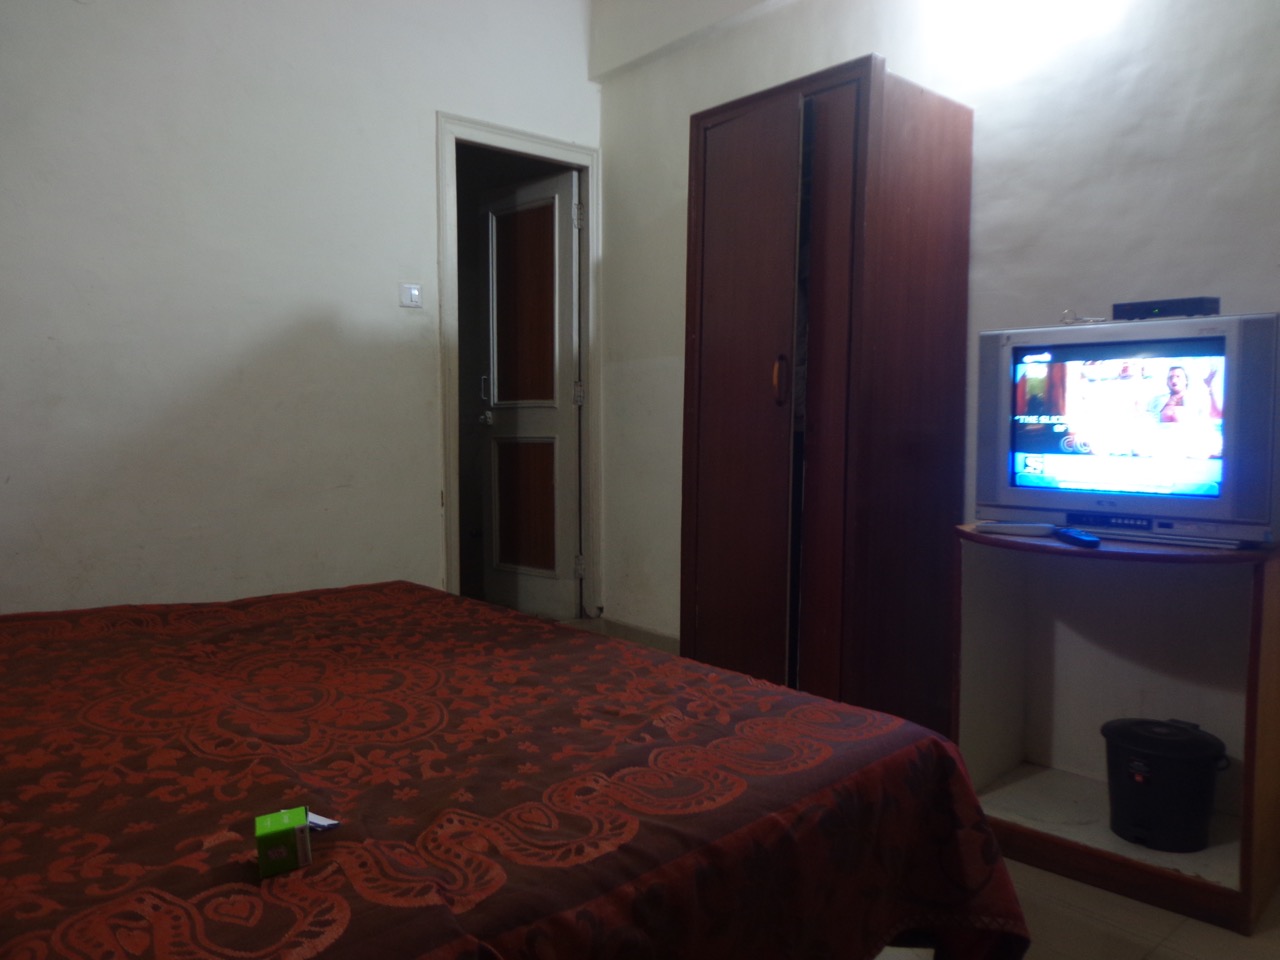 This is room 103 of Hotel Yatrika. The board declares in a relatively large font, "Government Approved".